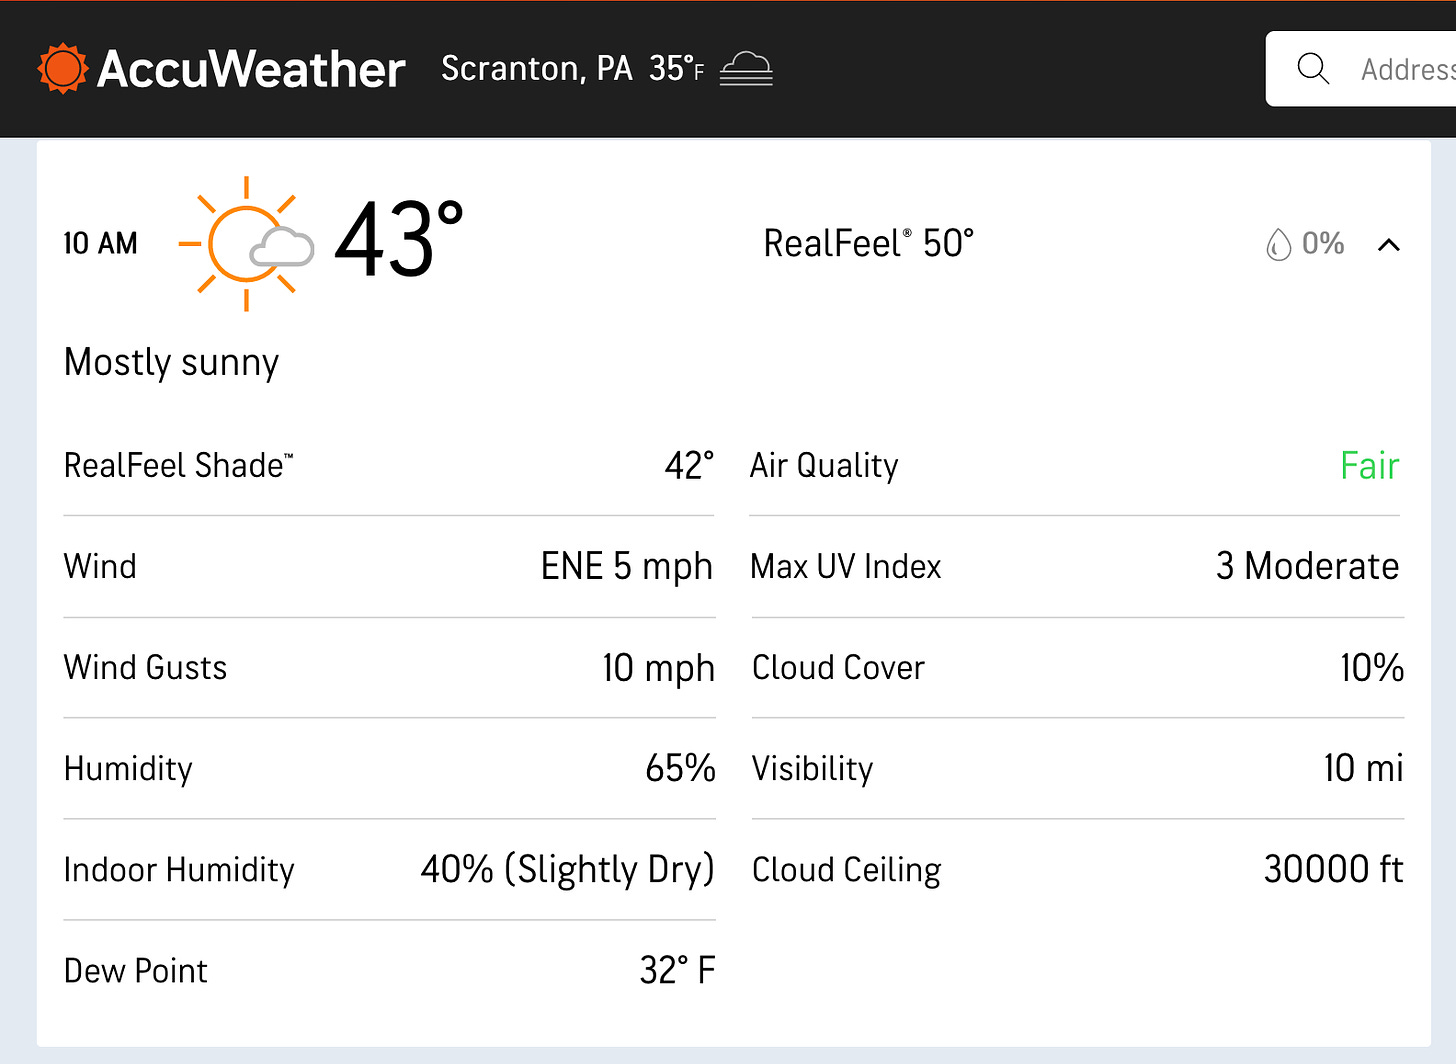 Image is of weather report page AccuWeather Scranton, PA 35°F 10 AM 43° RealFeel® 50° 0% Mostly sunny RealFeel Shade™ 42° Air Quality Fair Wind ENE 5 mph Max UV Index 3 Moderate Wind Gusts 10 mph Cloud Cover 10% Humidity 65% Visibility 10 mi Indoor Humidity 40% (Slightly Dry) Cloud Ceiling 30000 ft Dew Point 32° F